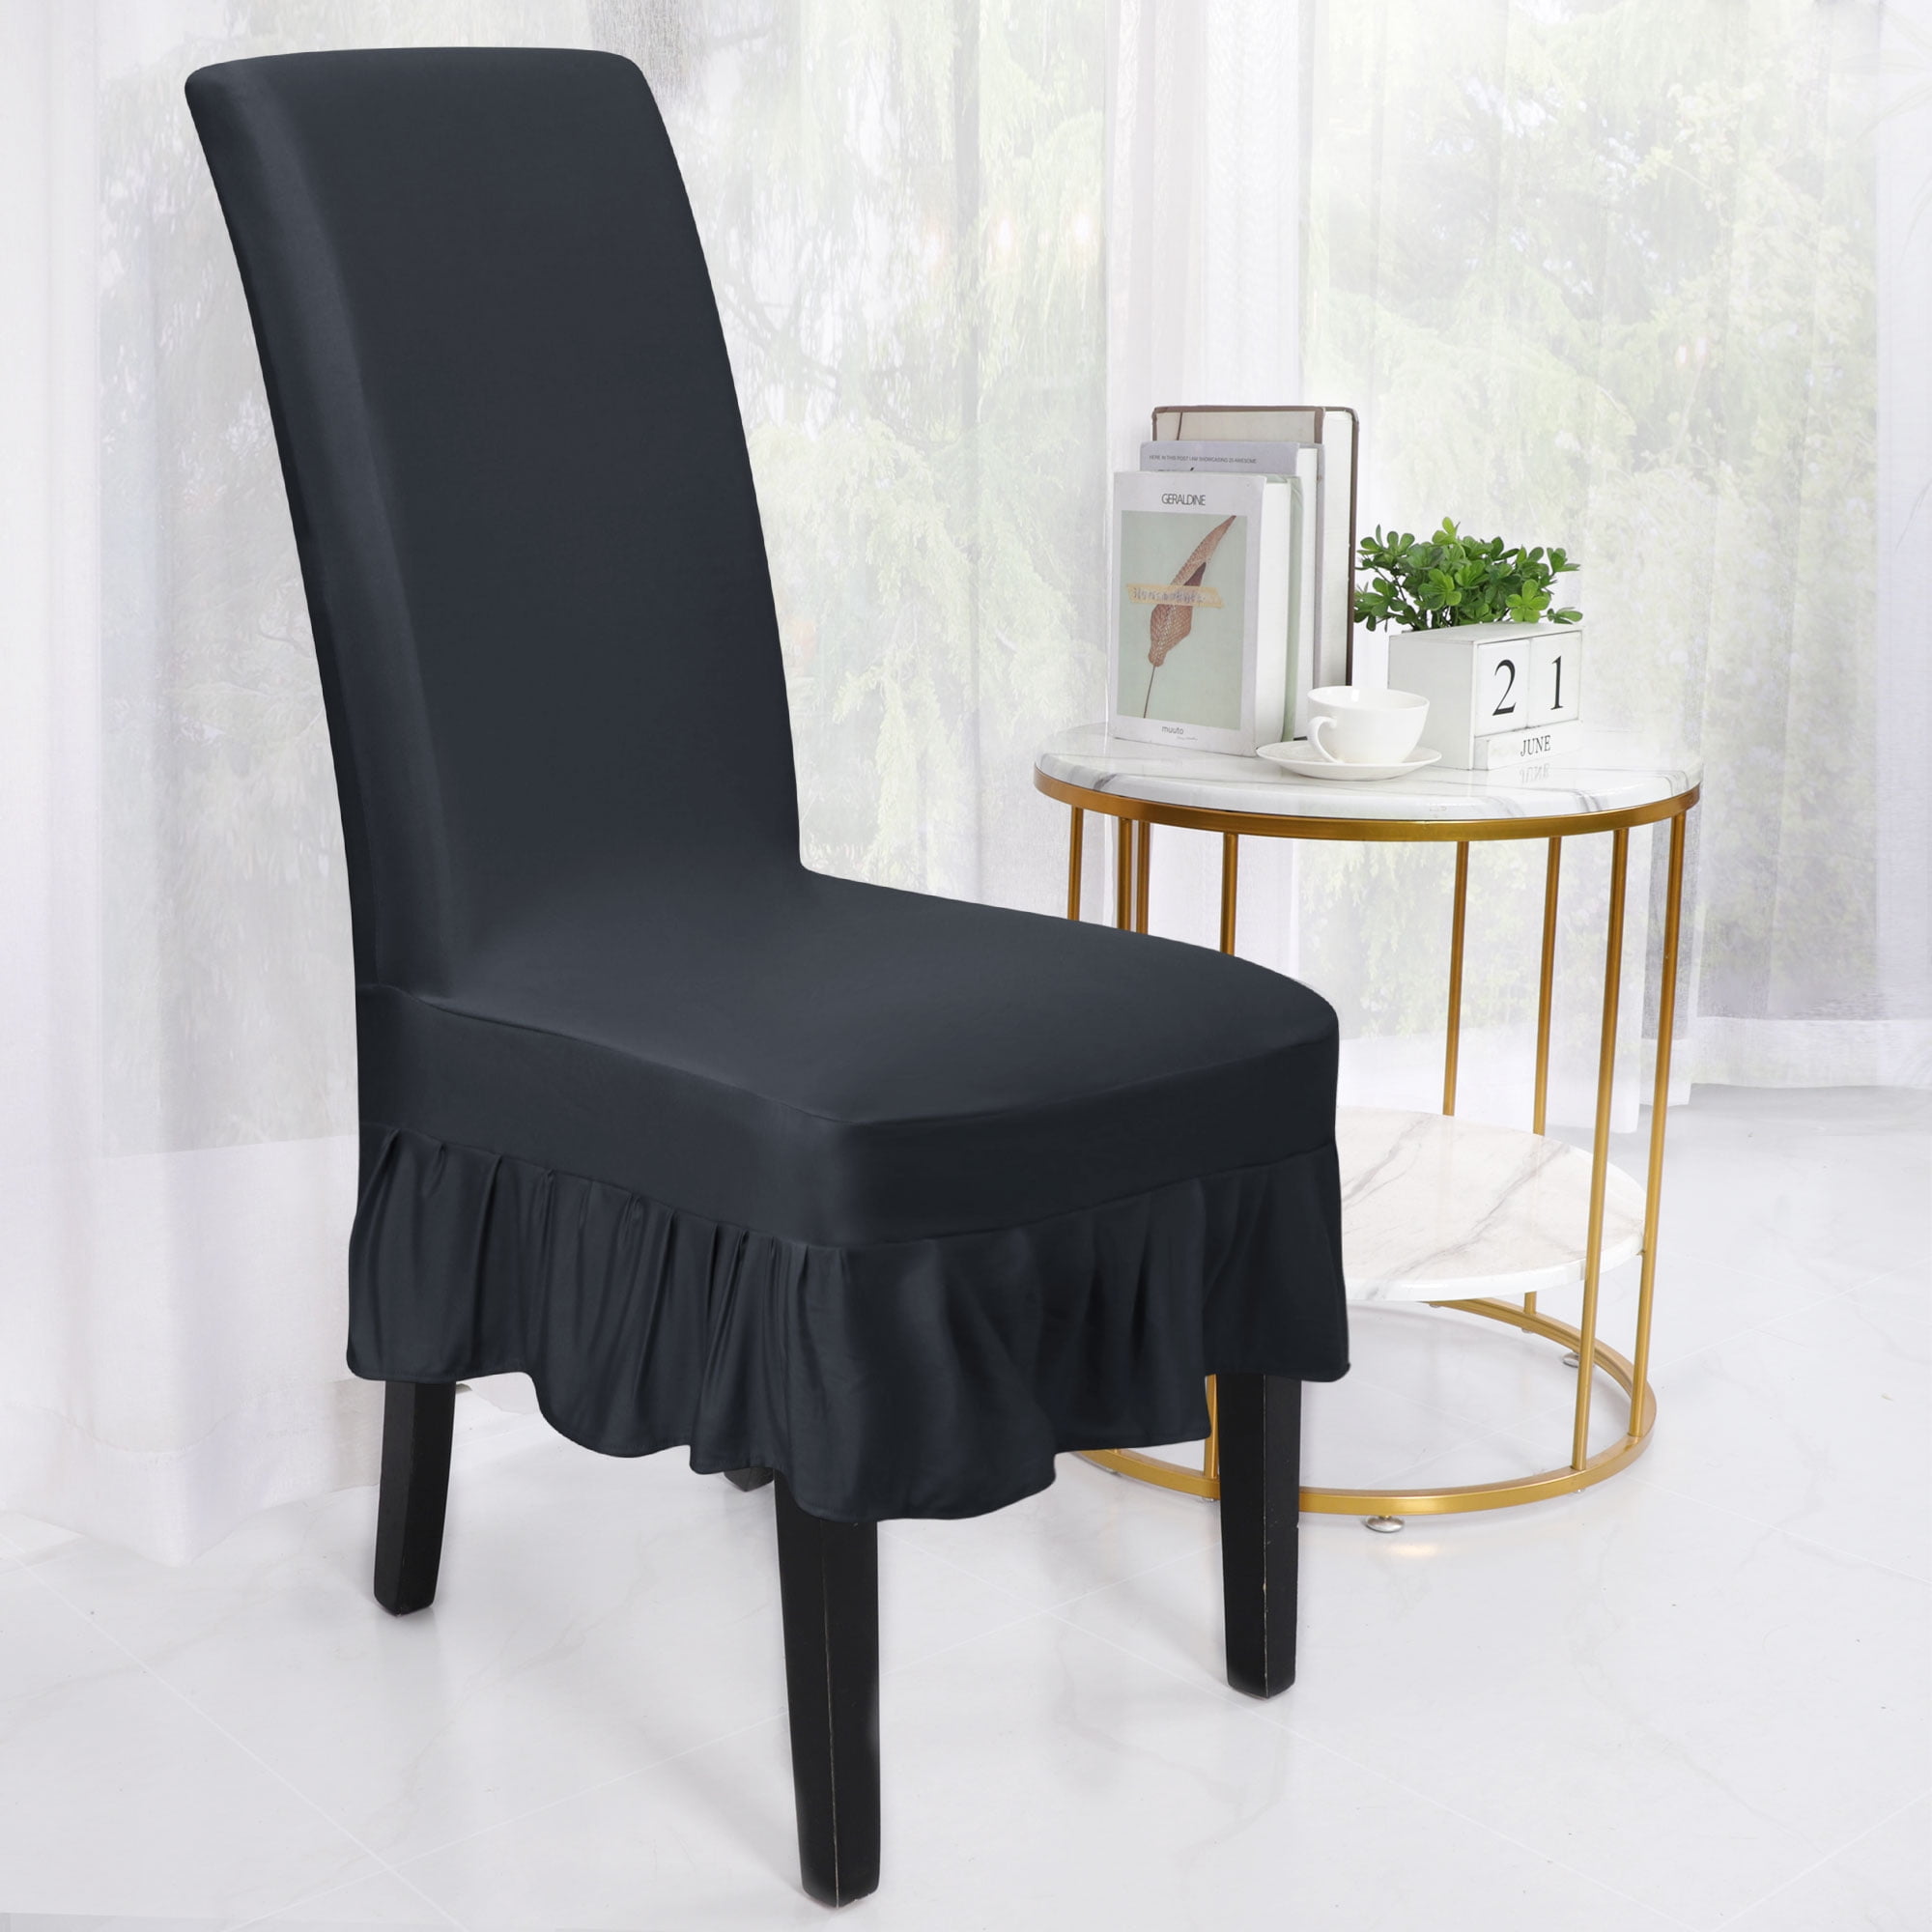 Details about   Velvet Chair Covers for Dining Room Soft Removable Dining Chair Slipcovers Se 